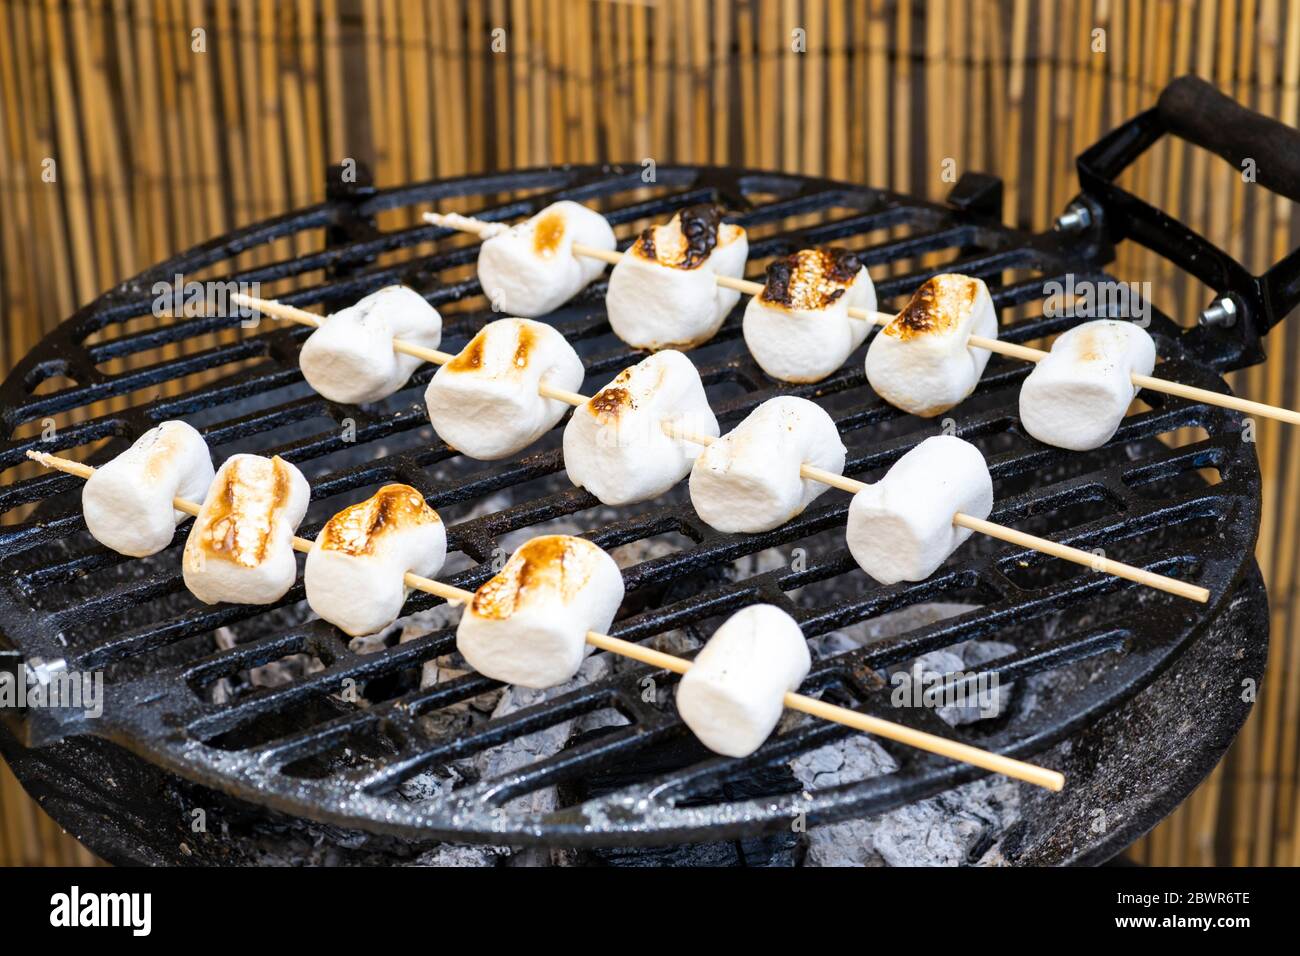 grilled skewers of marshmallow as dessert Stock Photo - Alamy